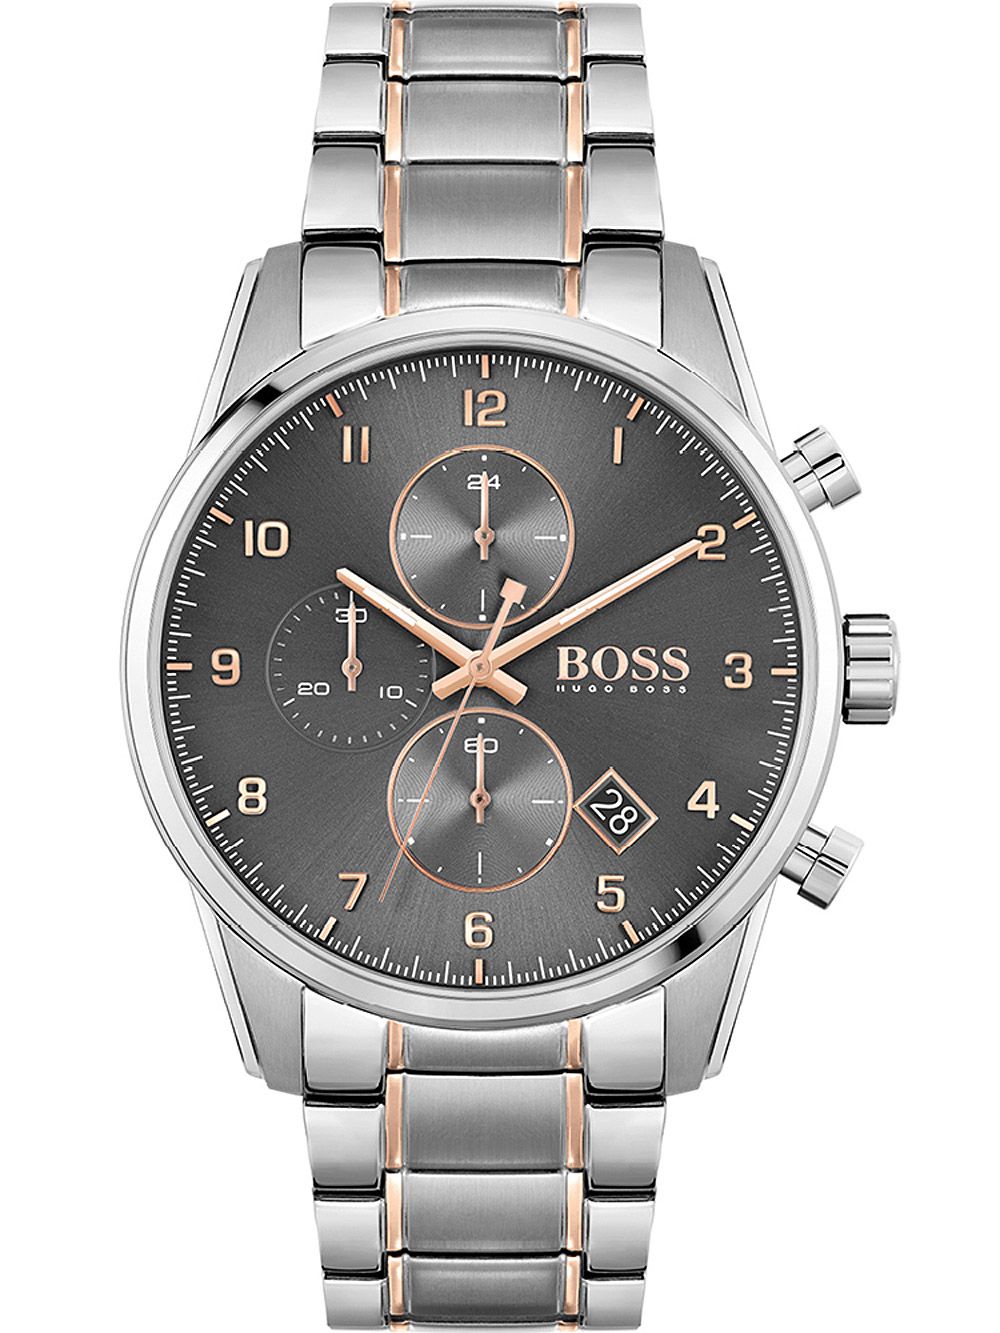 Hugo Boss Skymaster Two Tone Chronograph Men's Watch  1513789 - Big Daddy Watches